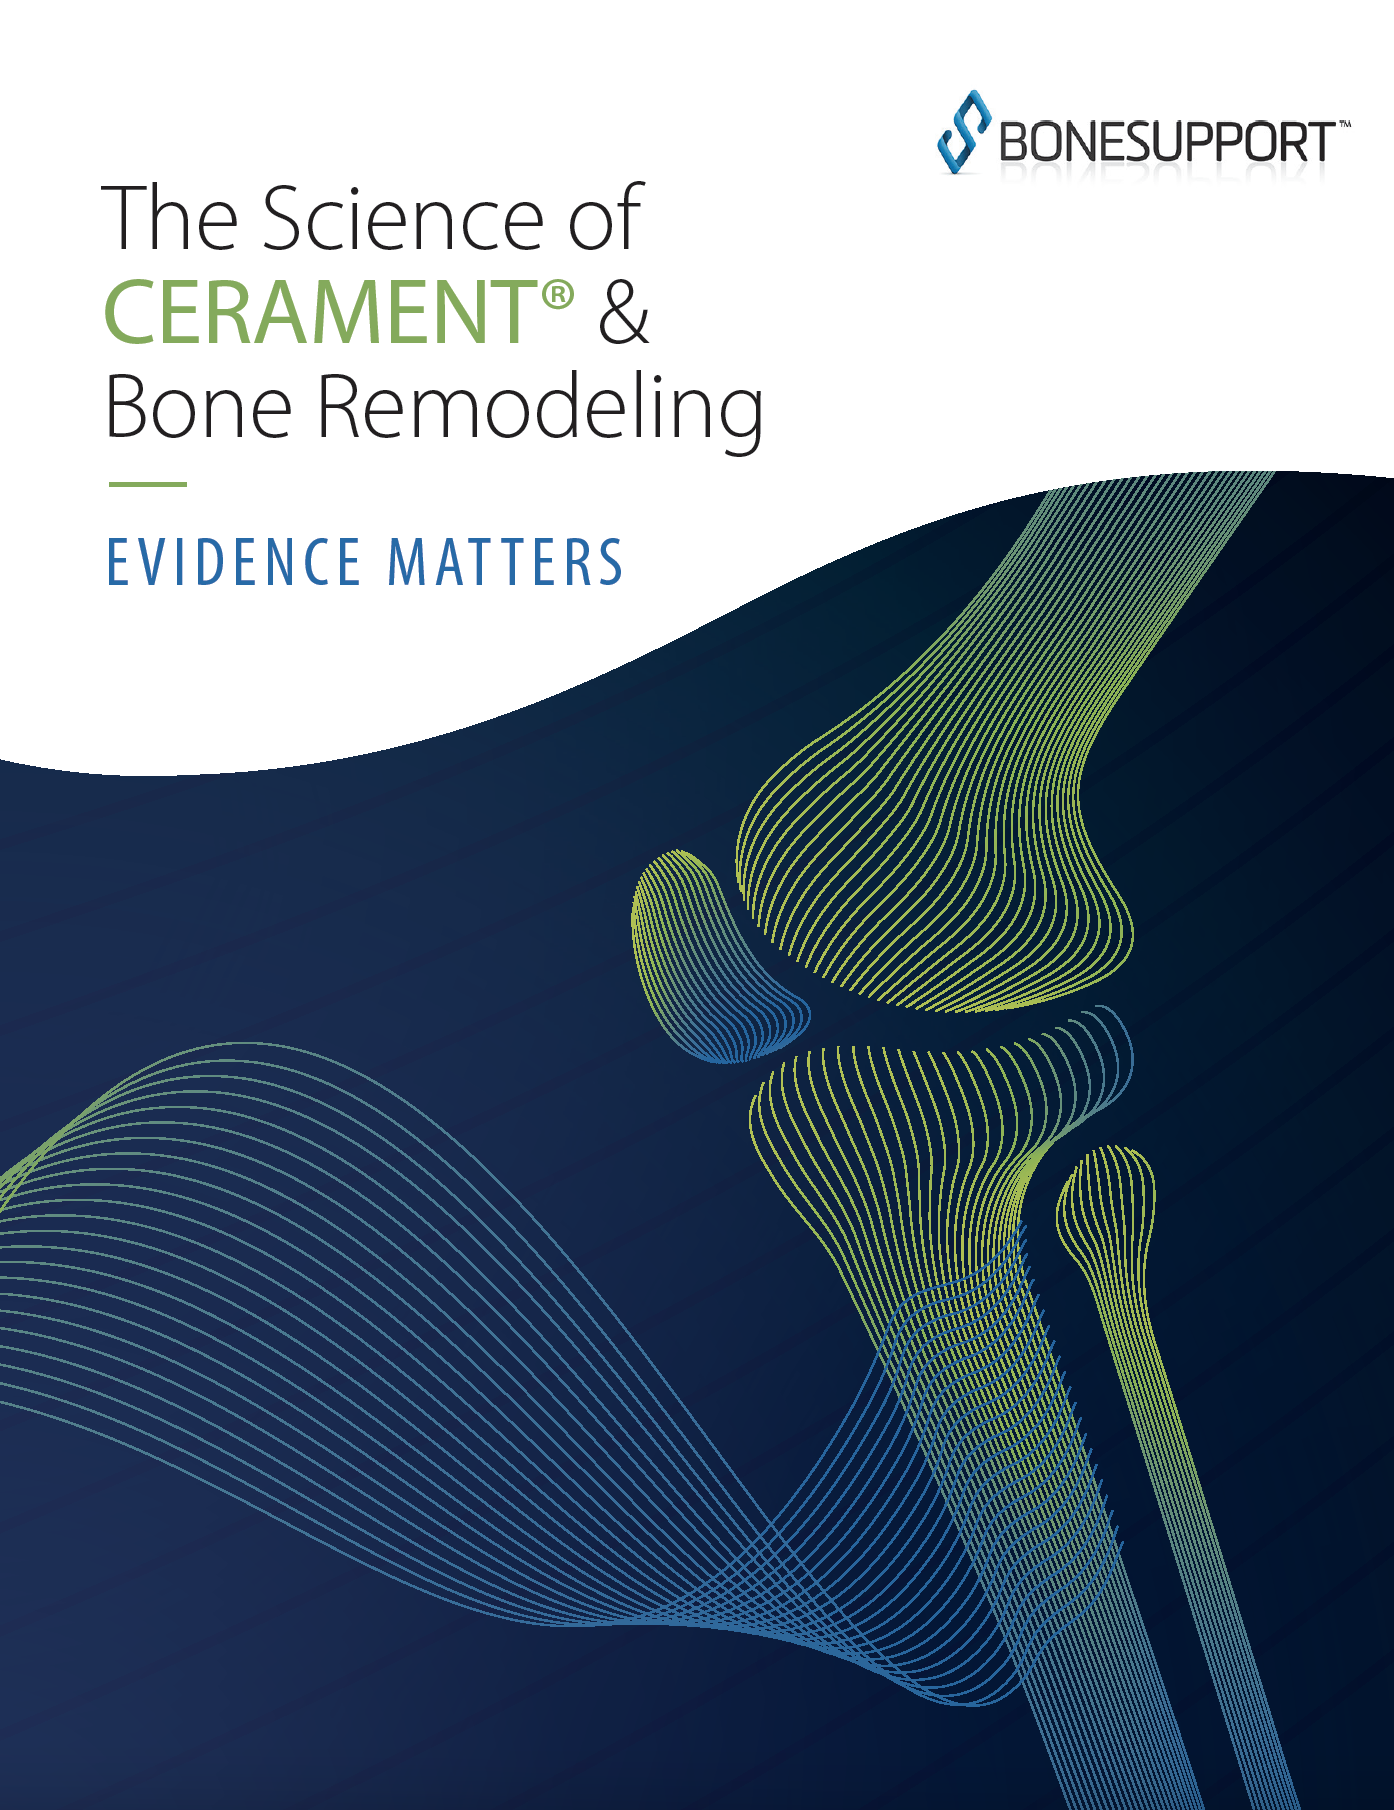 The Science of CERAMENT & Bone Remodeling